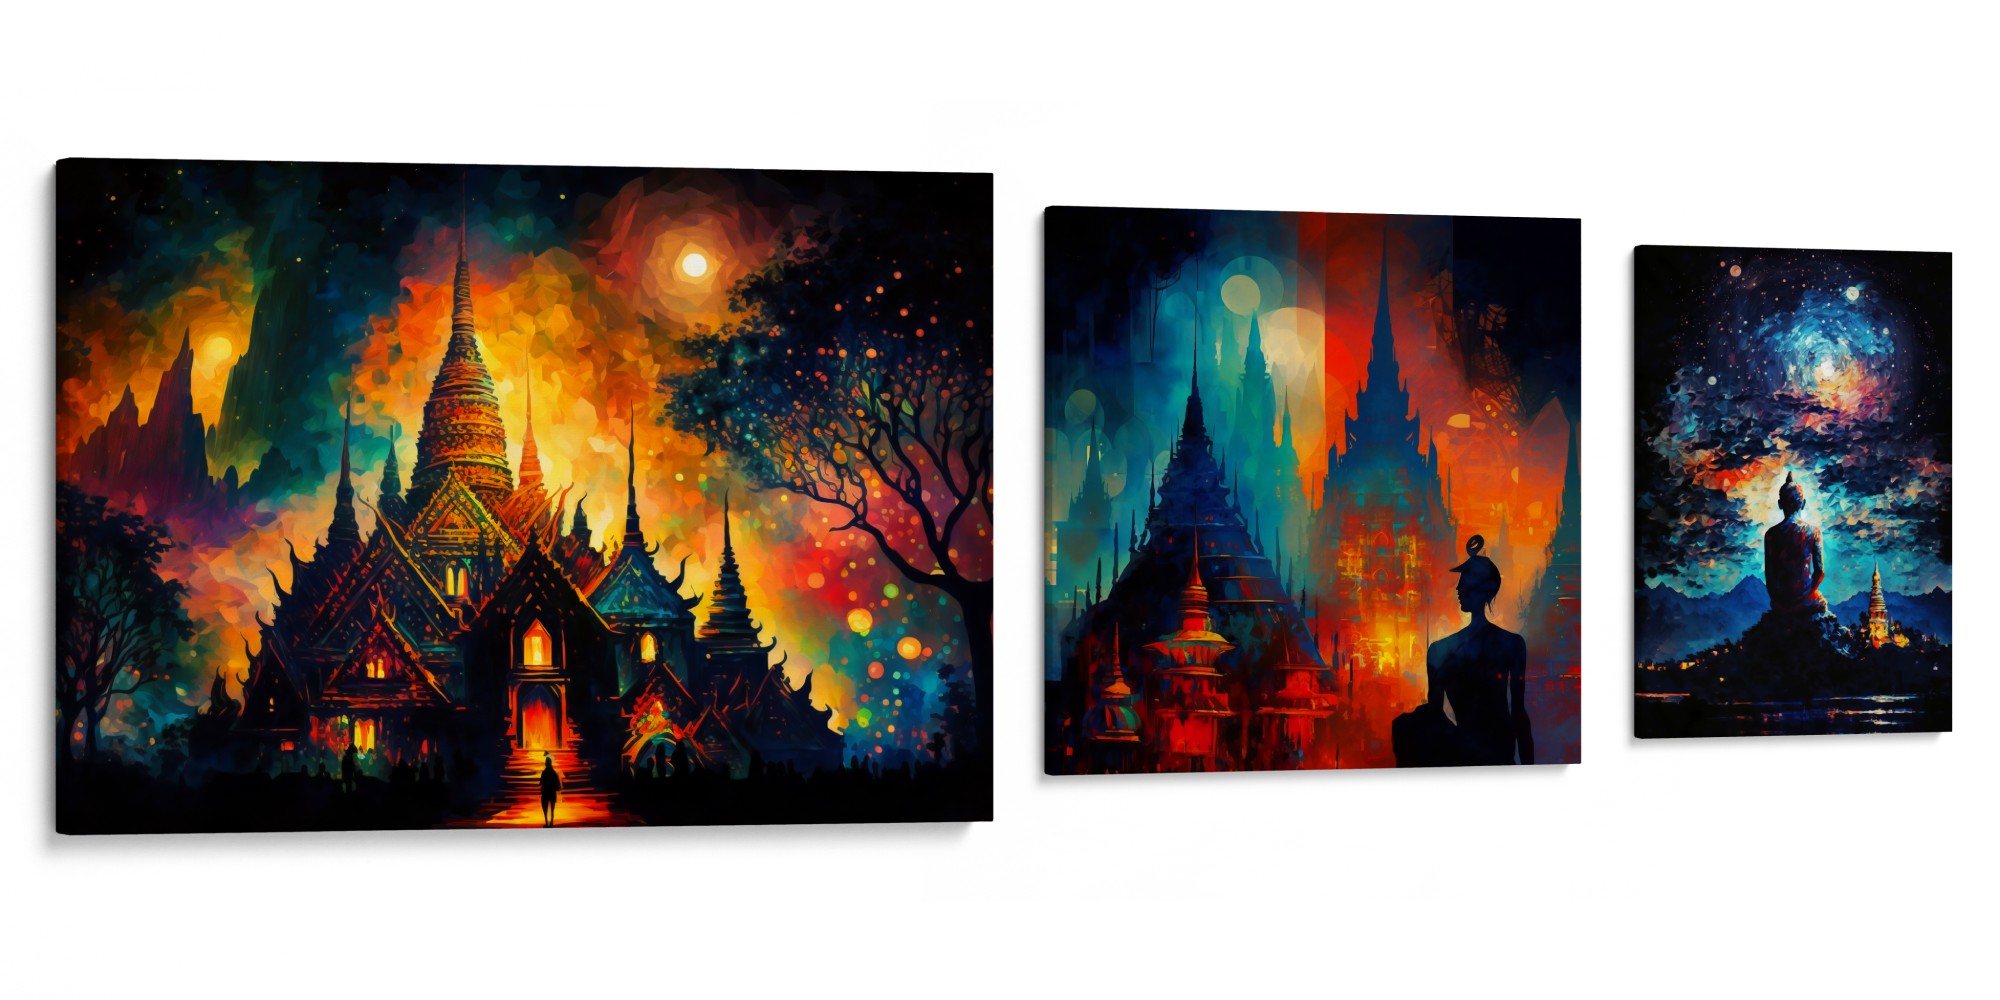 SERENE STRUCTURES Canvas Trio - Moonlit temples standing tall, exclusively from Koh Chang Art Studio.